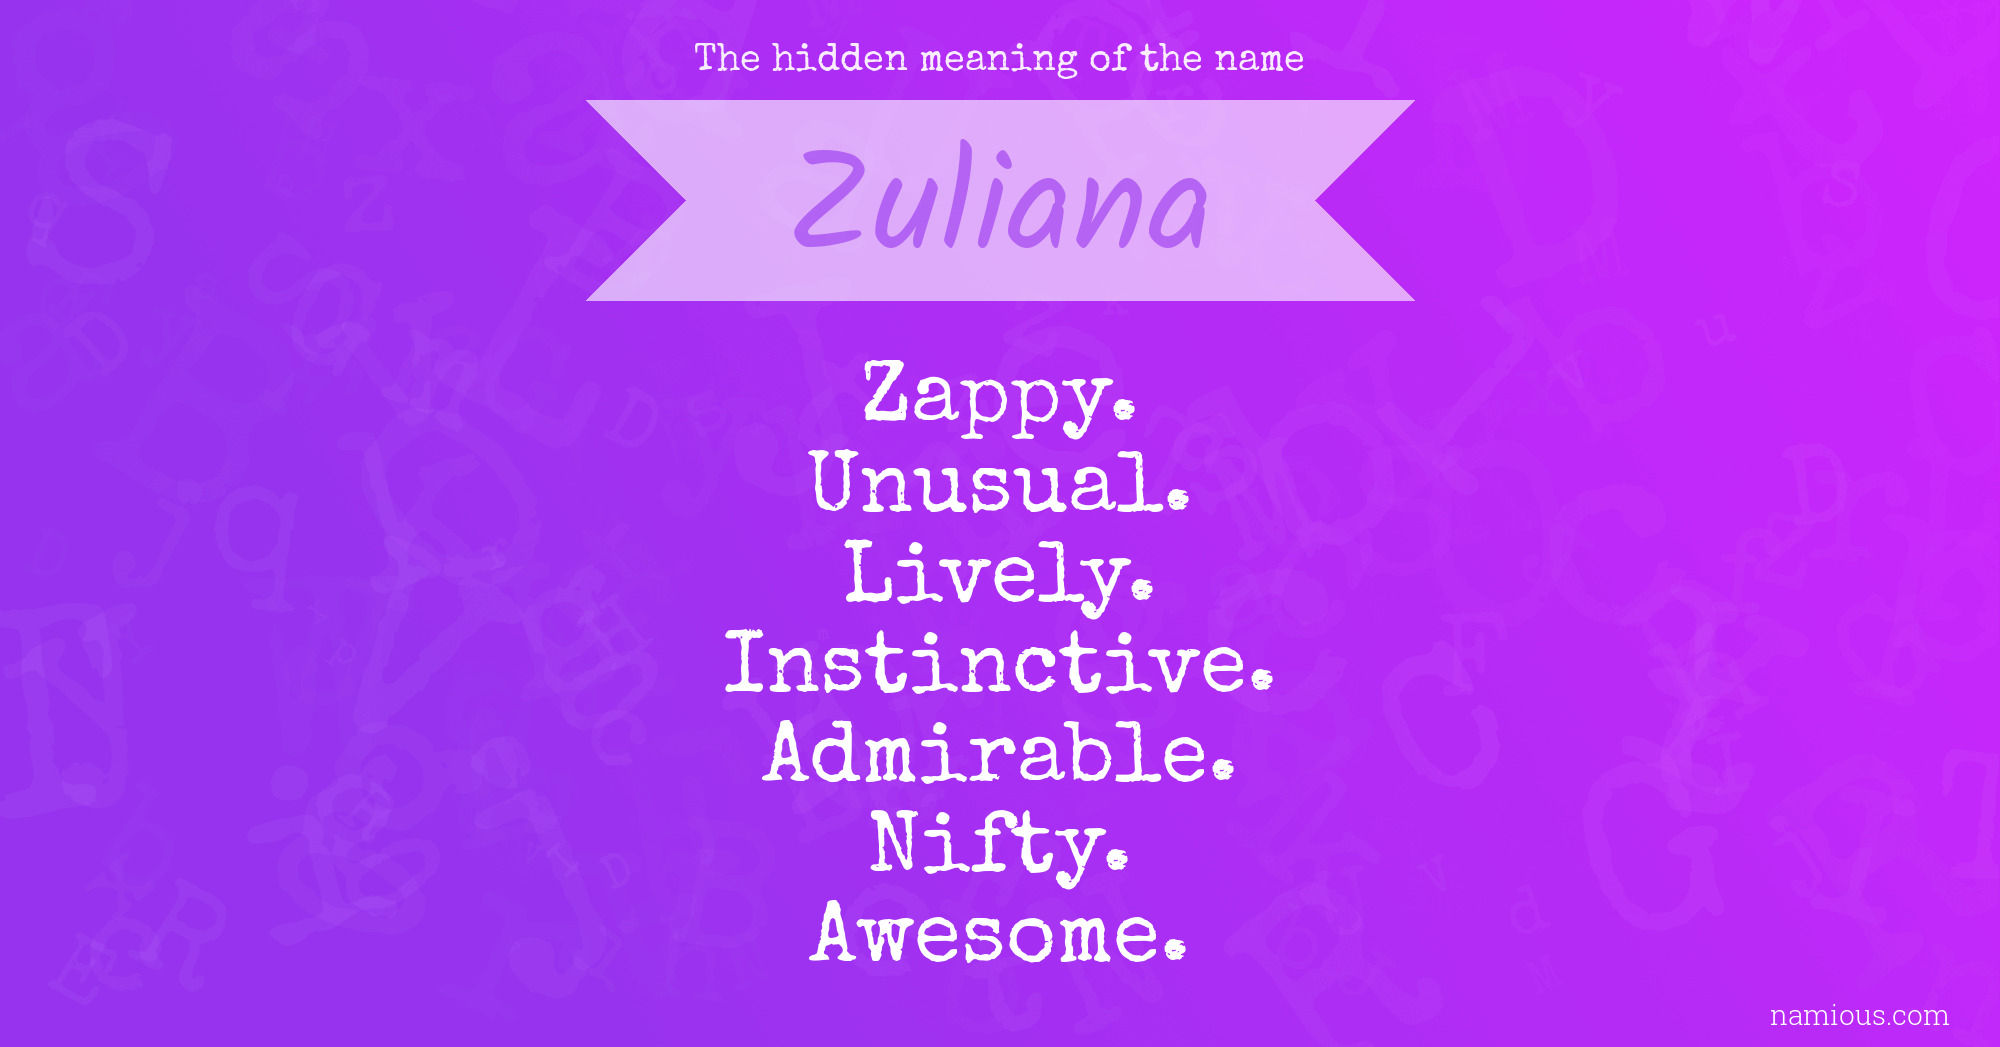 The hidden meaning of the name Zuliana